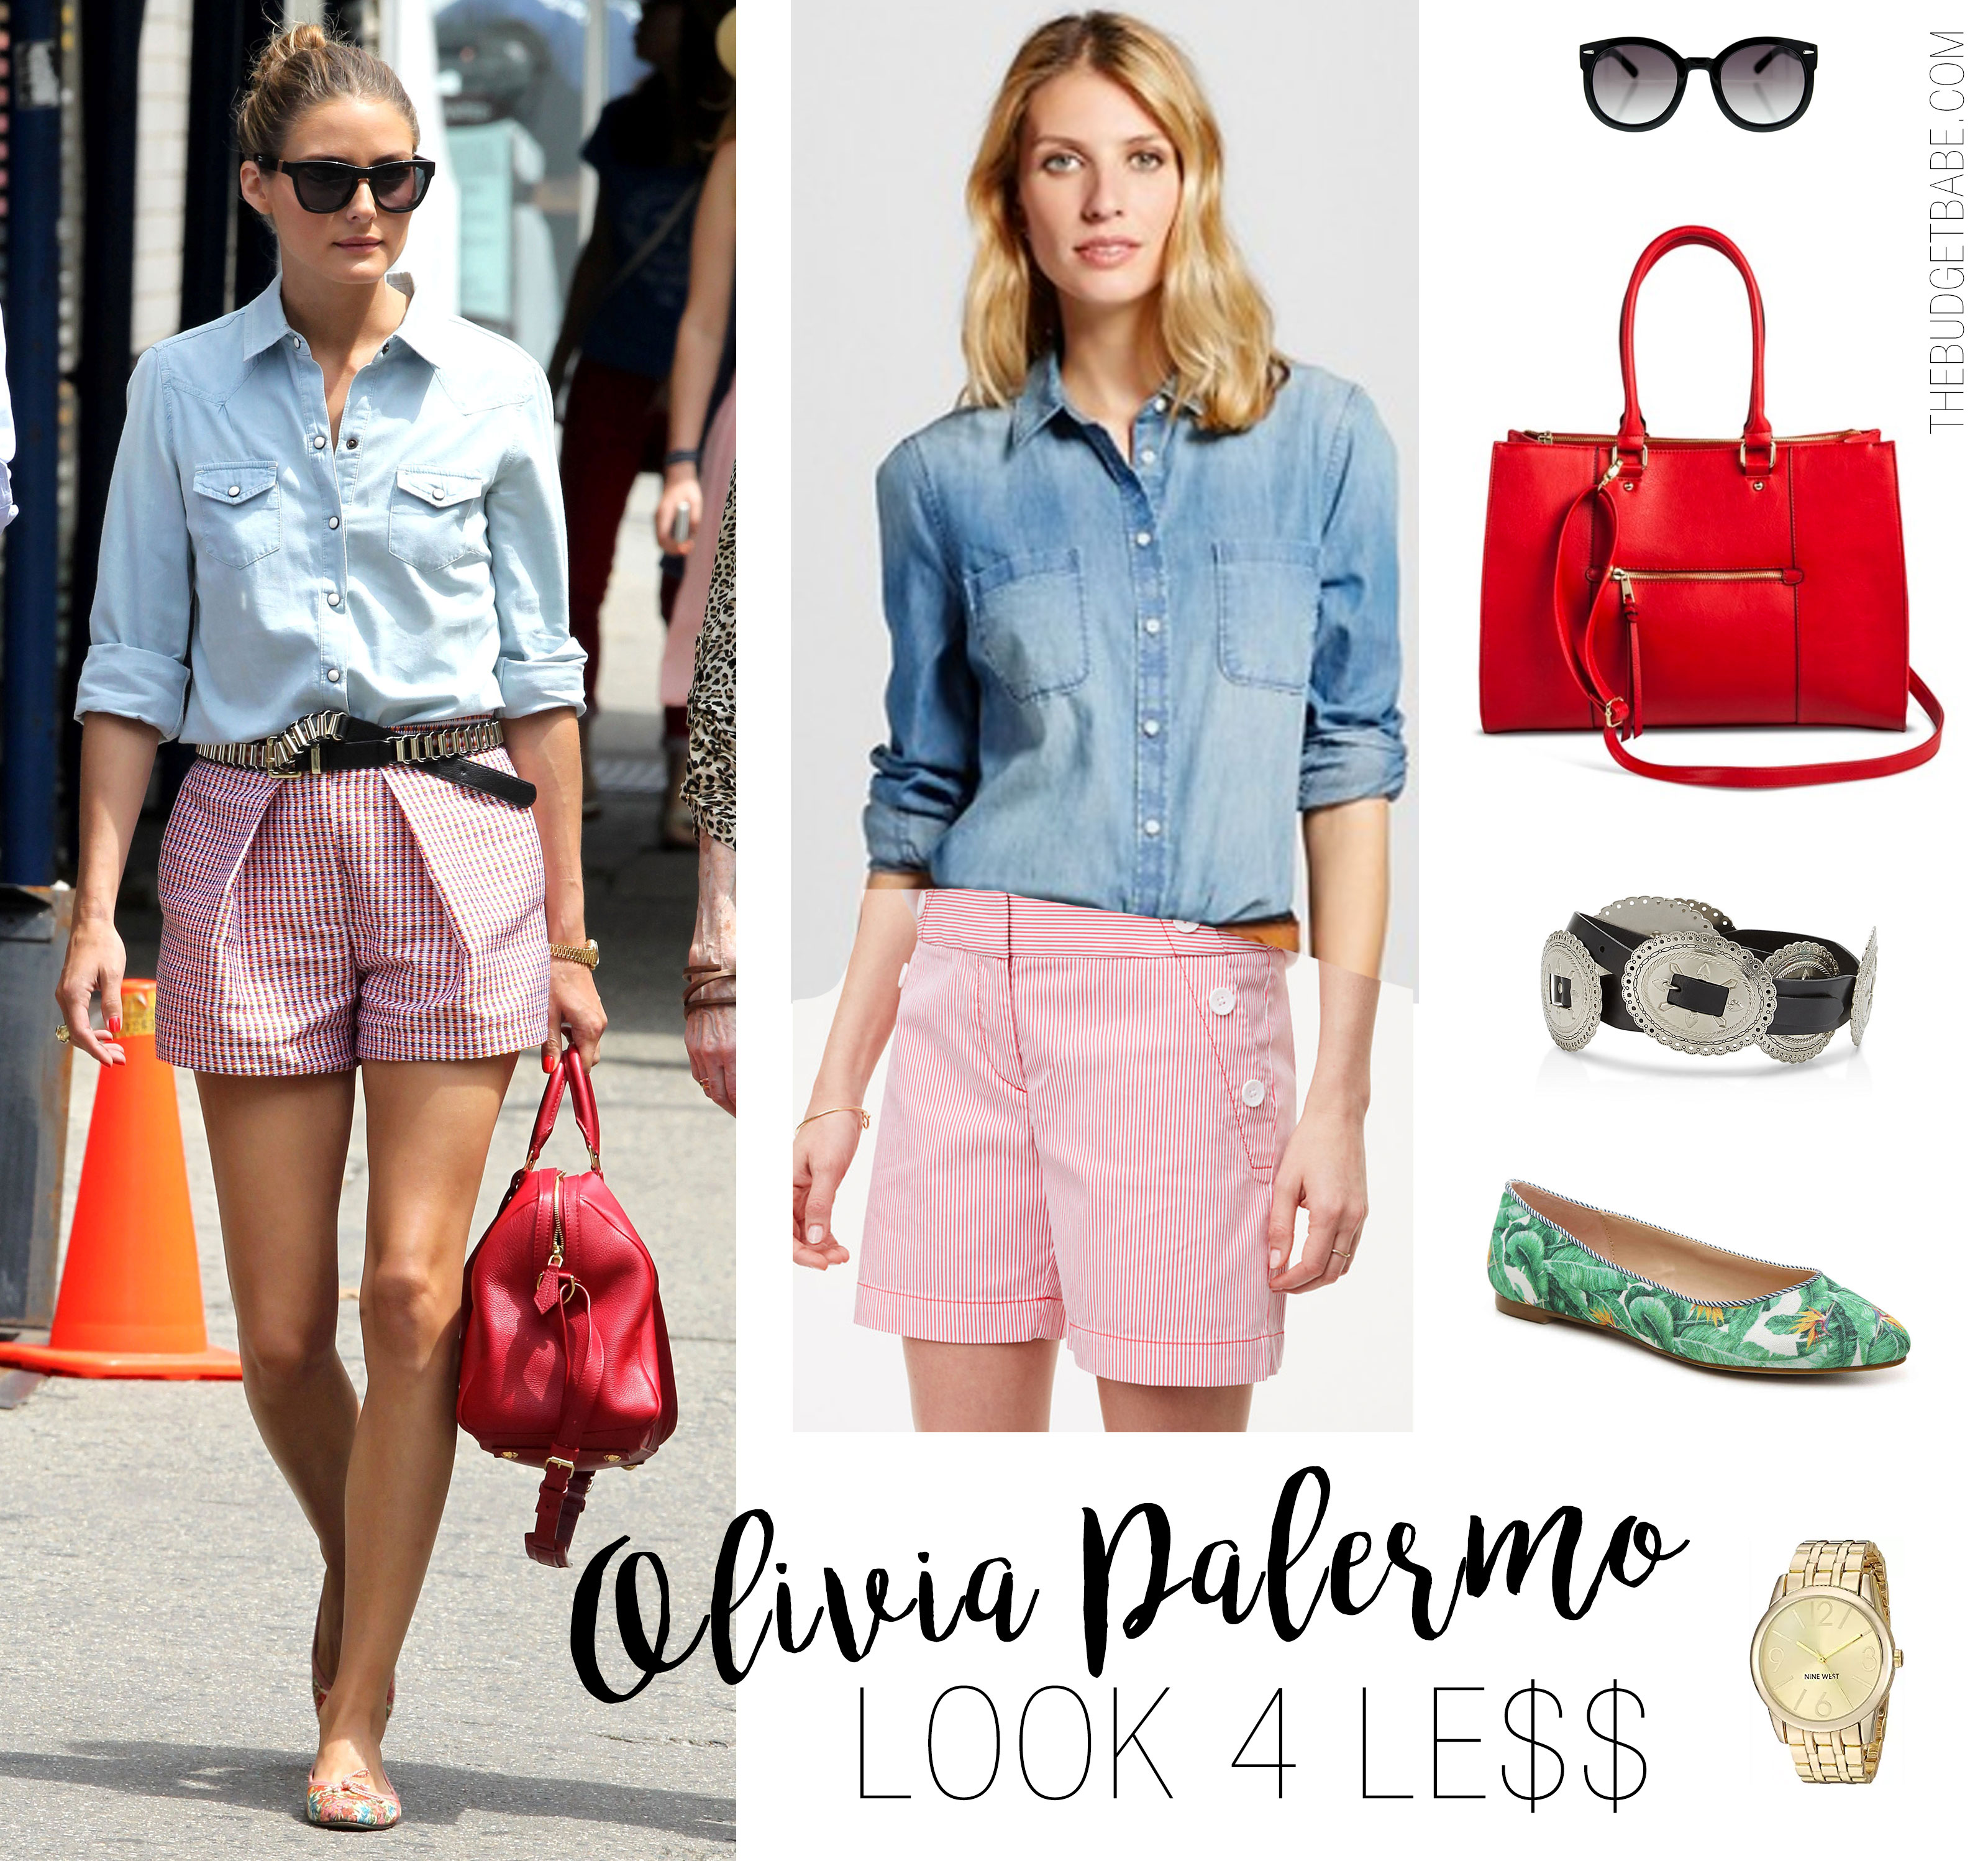 Olivia Palermo's denim shirt and red seersucker shorts look is perfect for summer holidays like the Fourth of July!